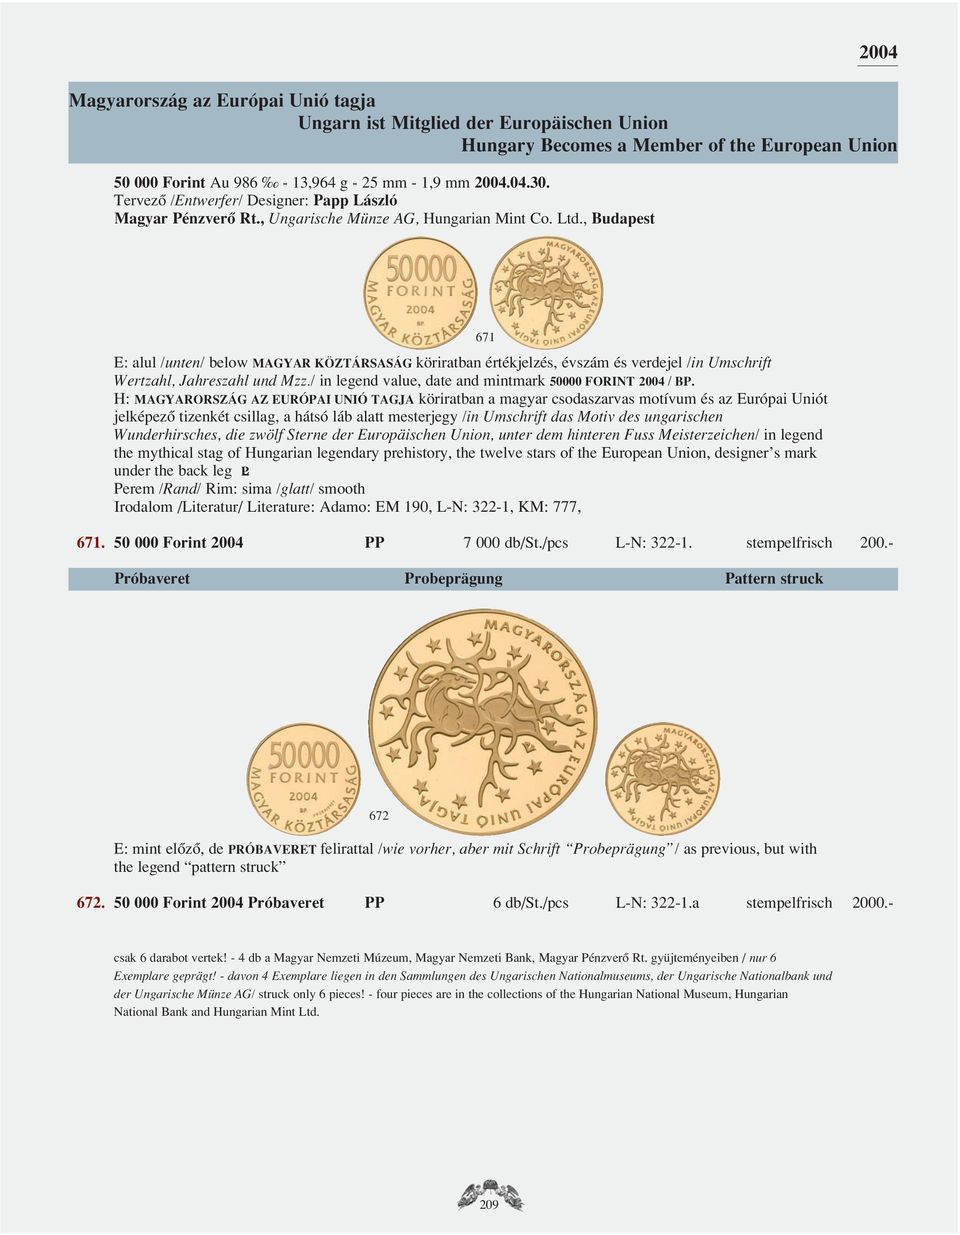 / in legend value, date and mintmark 50000 FORINT 2004 / BP.